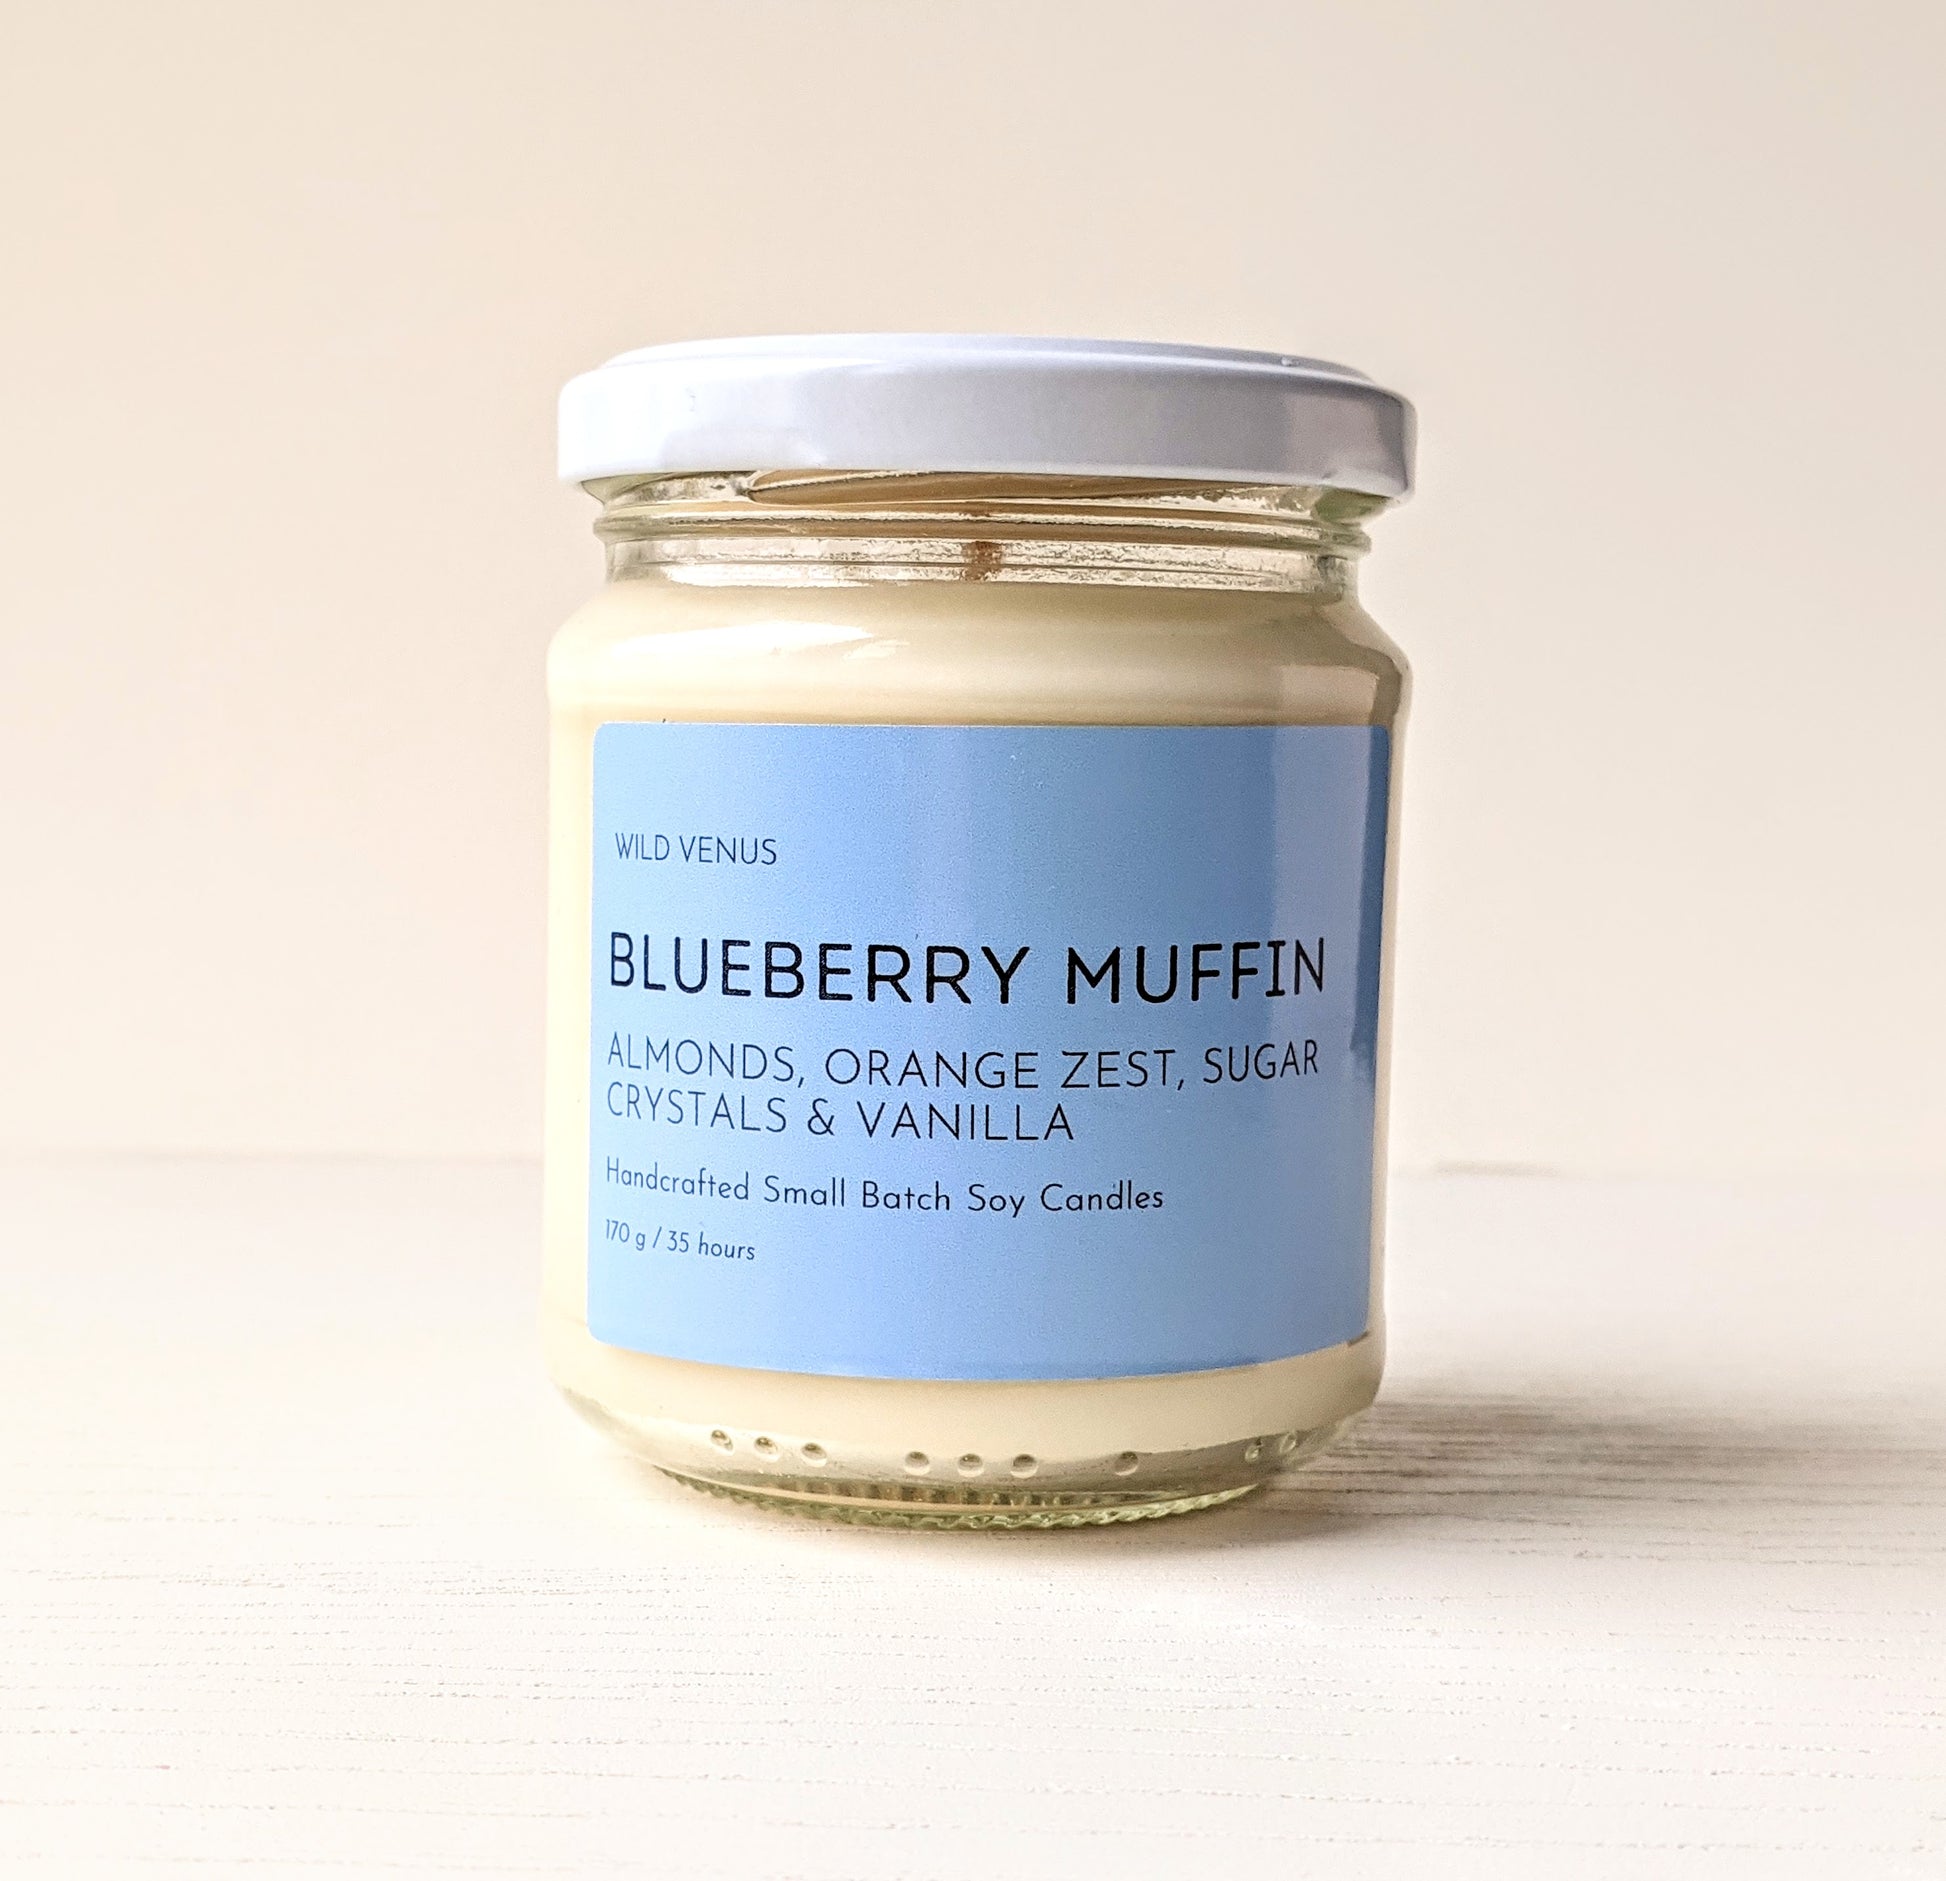 A blueberry muffin scented candle against a white background.